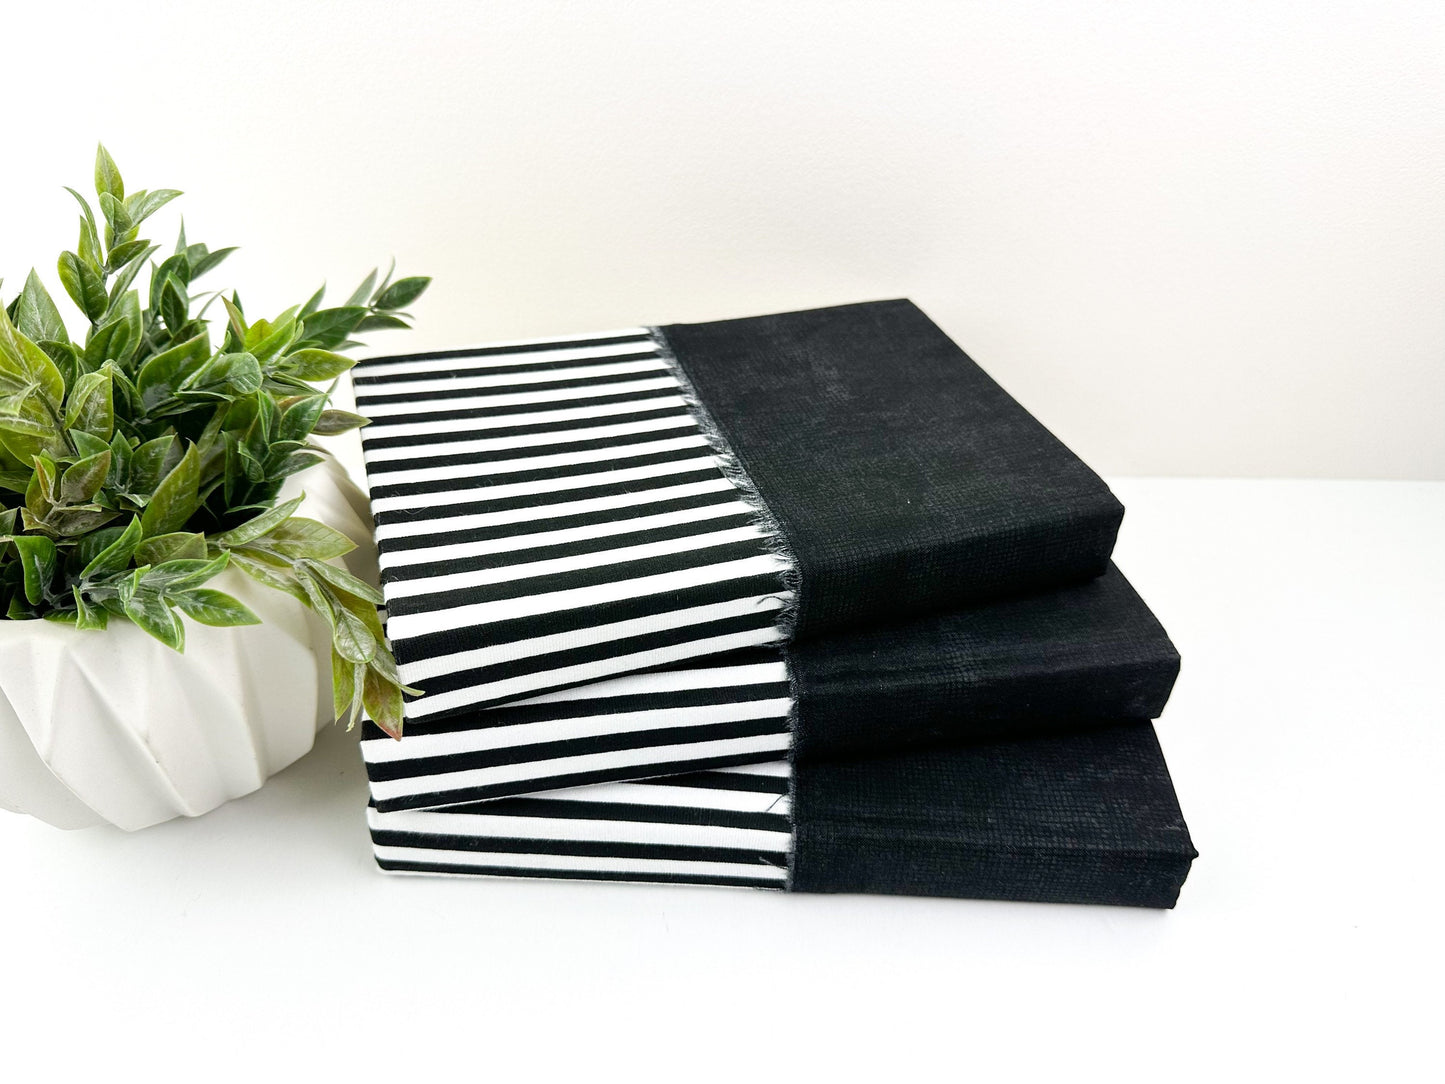 Black and White Fabric Covered Books